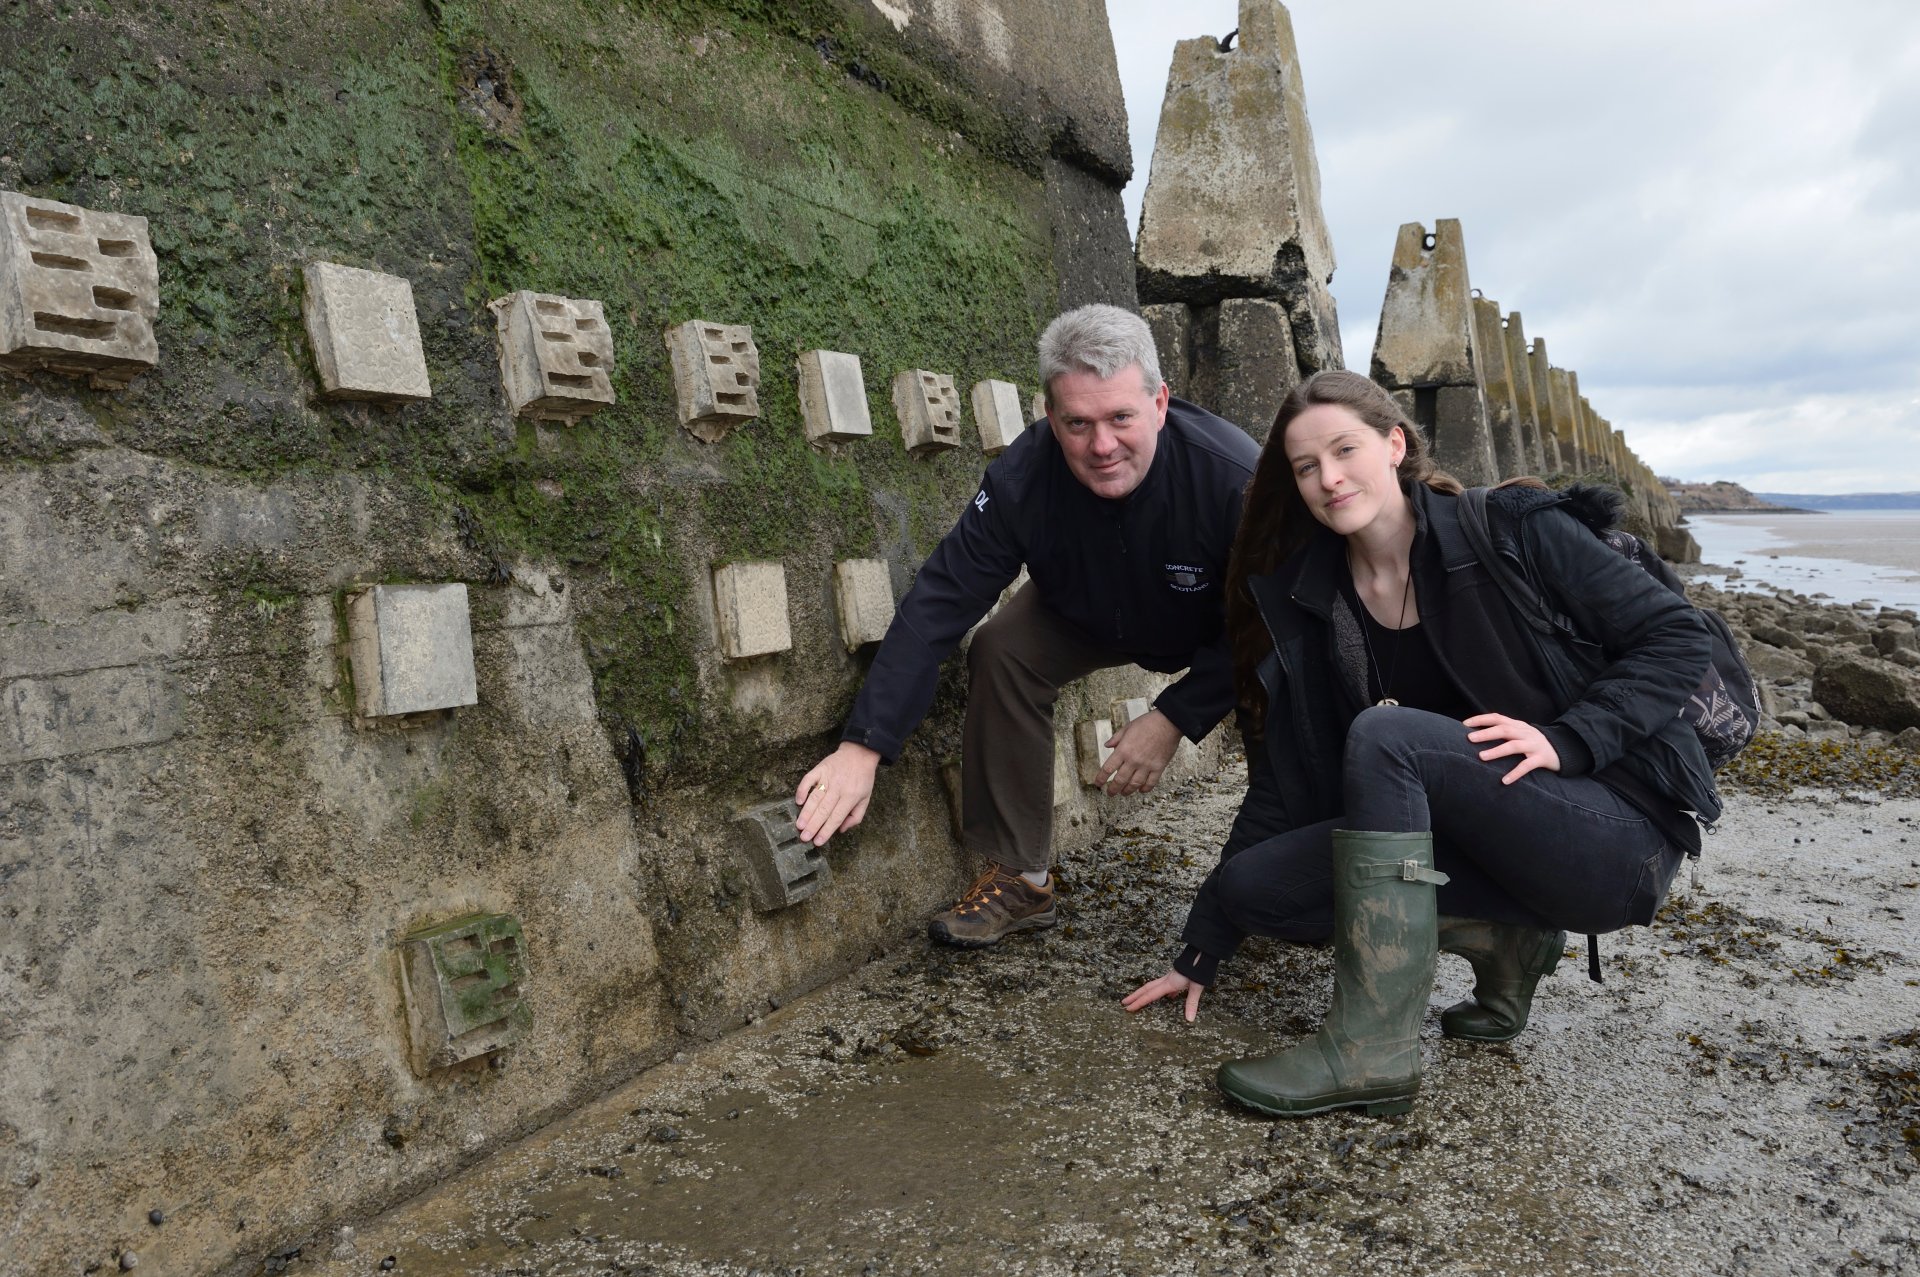 Dale Lyon Concrete in the Classroom) and Mairi MacArthur ( PhD student Glasgow Uni), standing beside some concrete habitat blocks installed on the sea defences at Cramond as part of the Concrete in the Classroom project. ©Lorne Gill/SNH